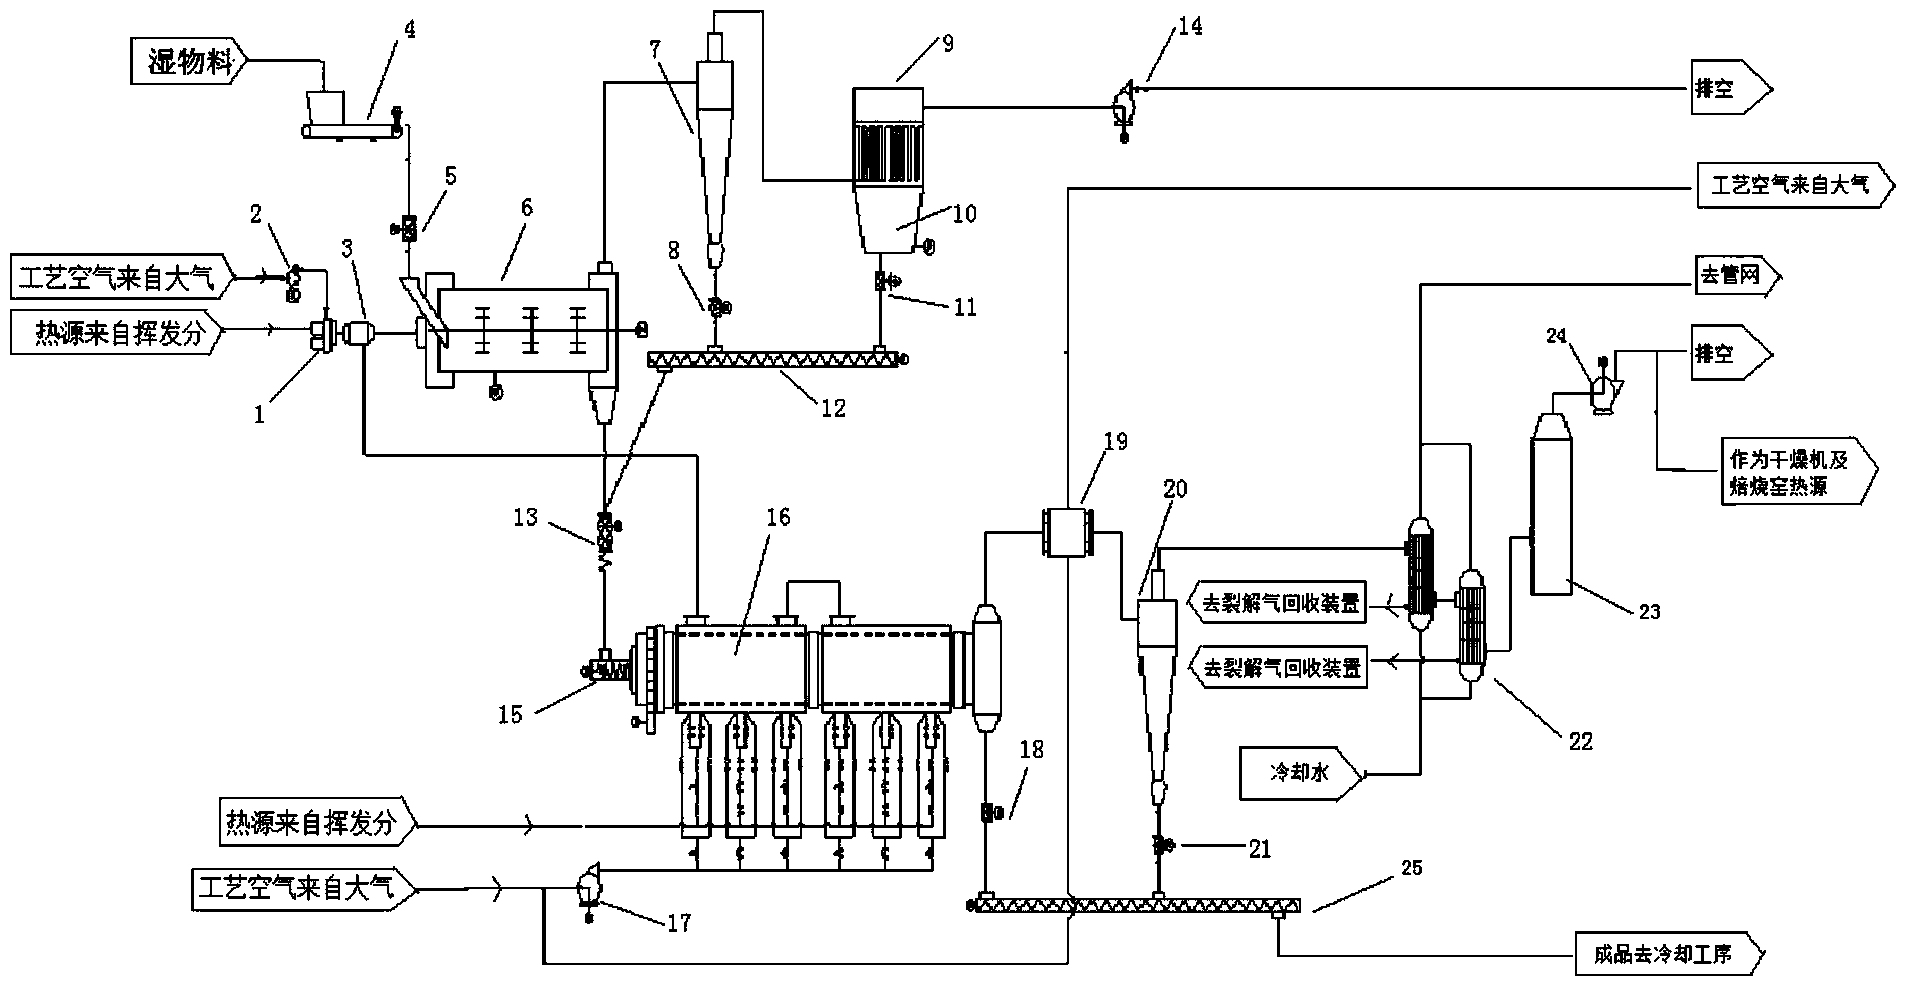 Oil sand calcining device and an oil sand calcining process